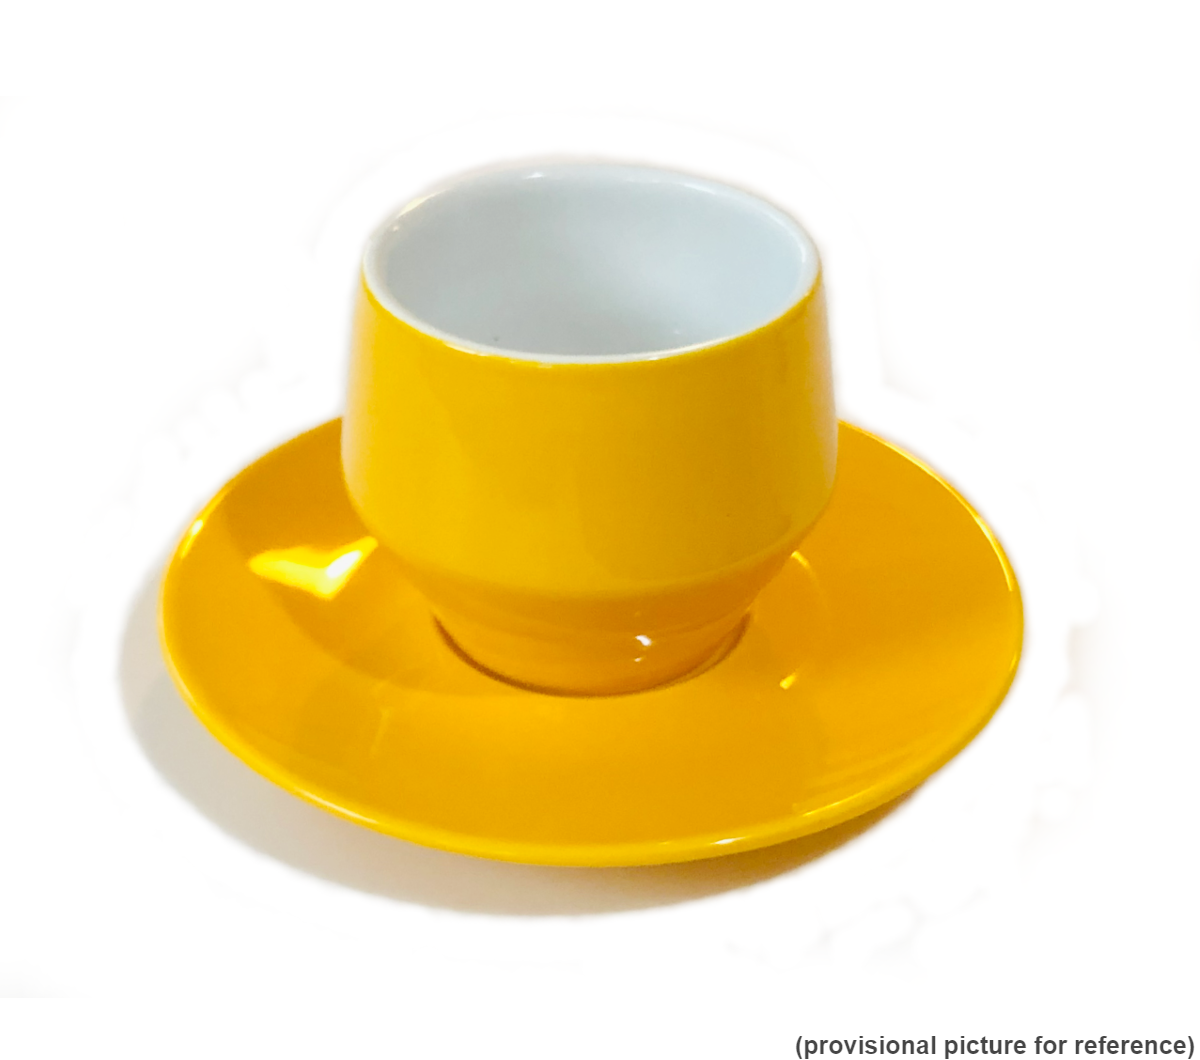 "MANIKO" Double-Walled YELLOW - 205ml Cappuccino Cups